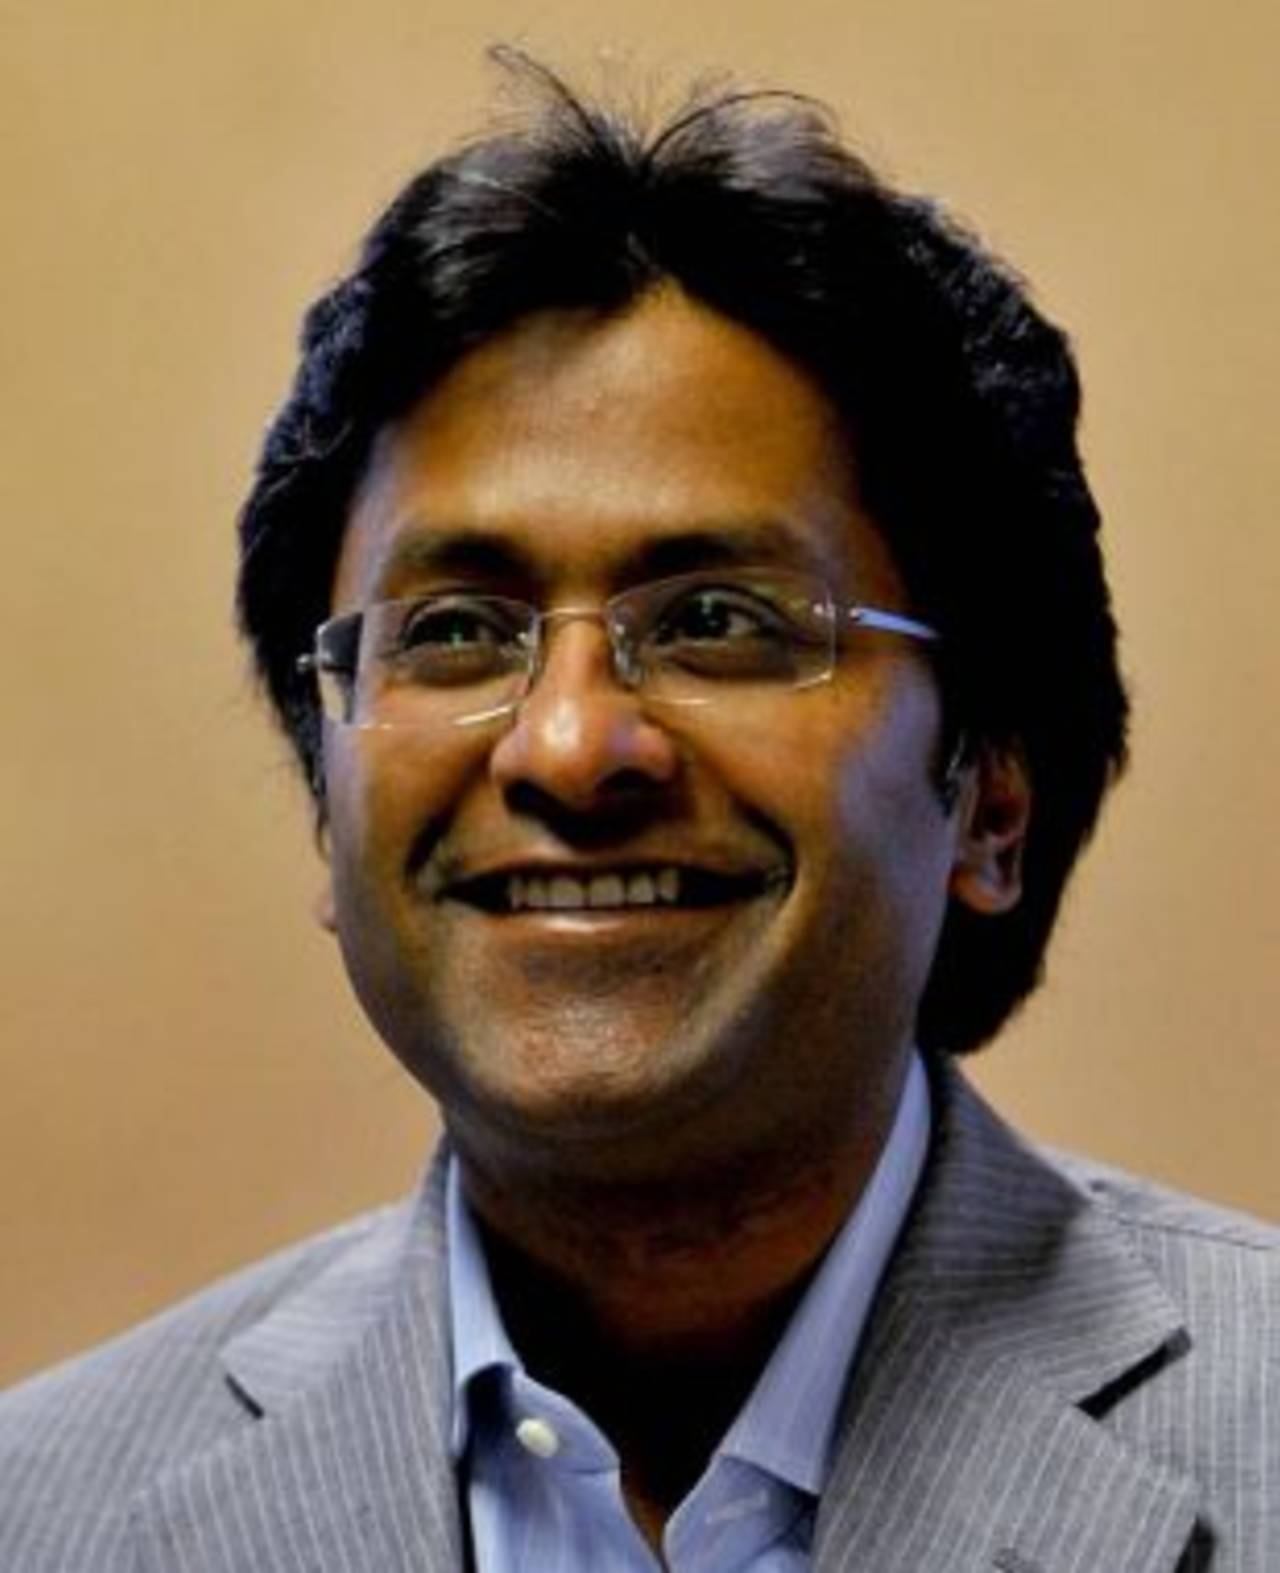 Lalit Modi at a press conference announcing that South Africa will host the second season of the IPL, Johannesburg, March 24, 2009